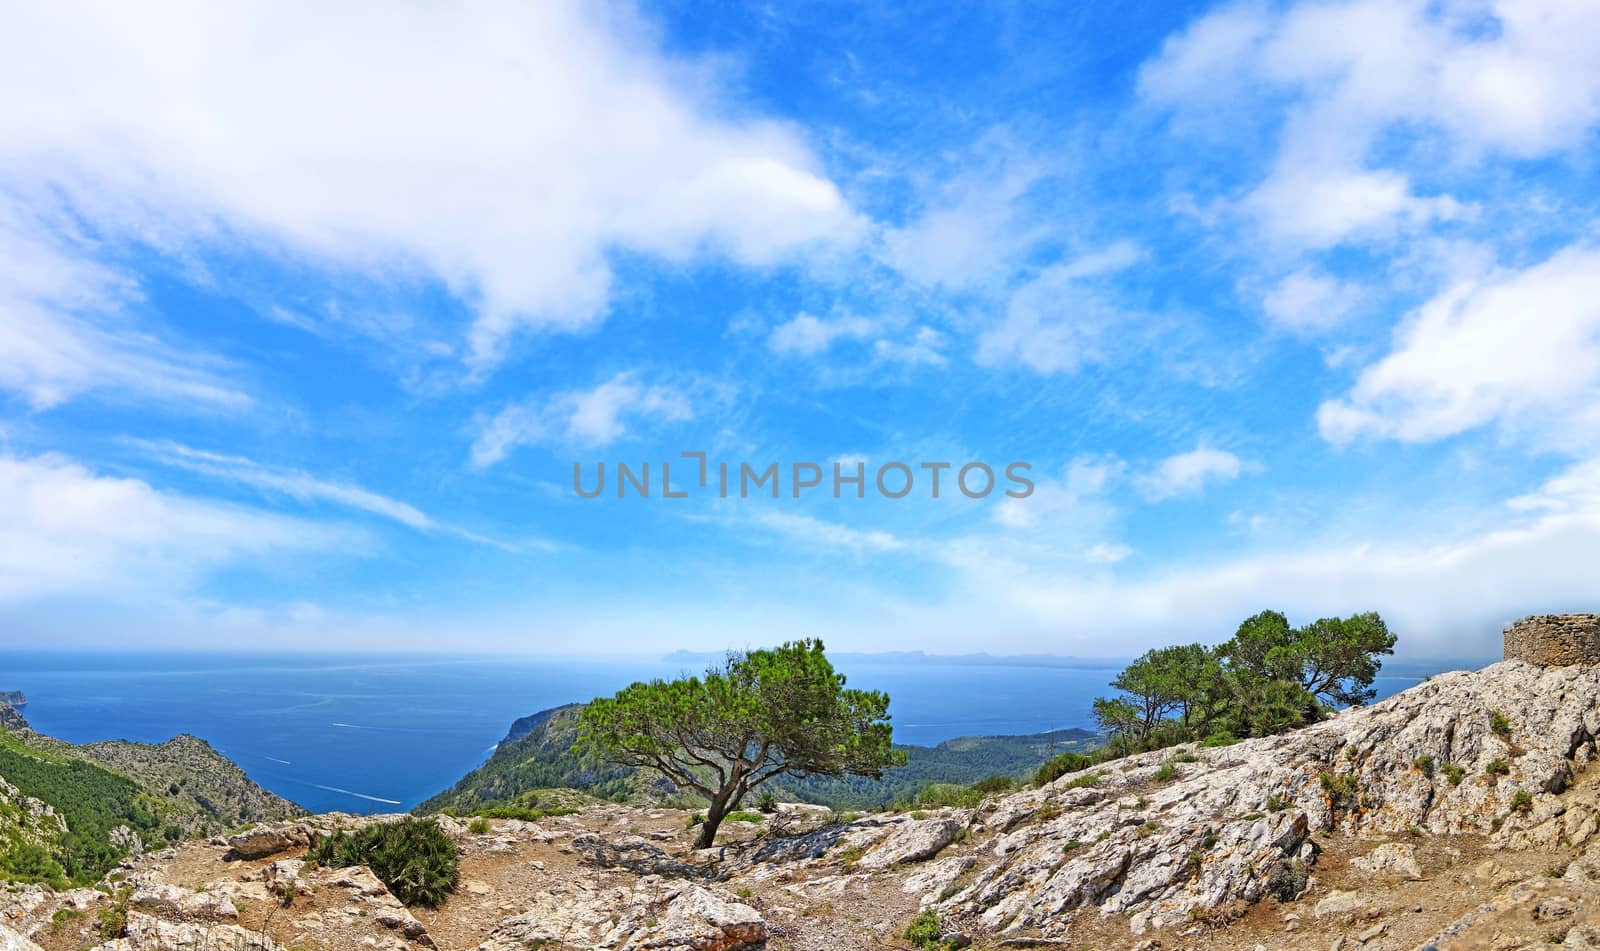 Mediterranean mountain / ocean panorama with tree - horizon / blue water and cloudy sky